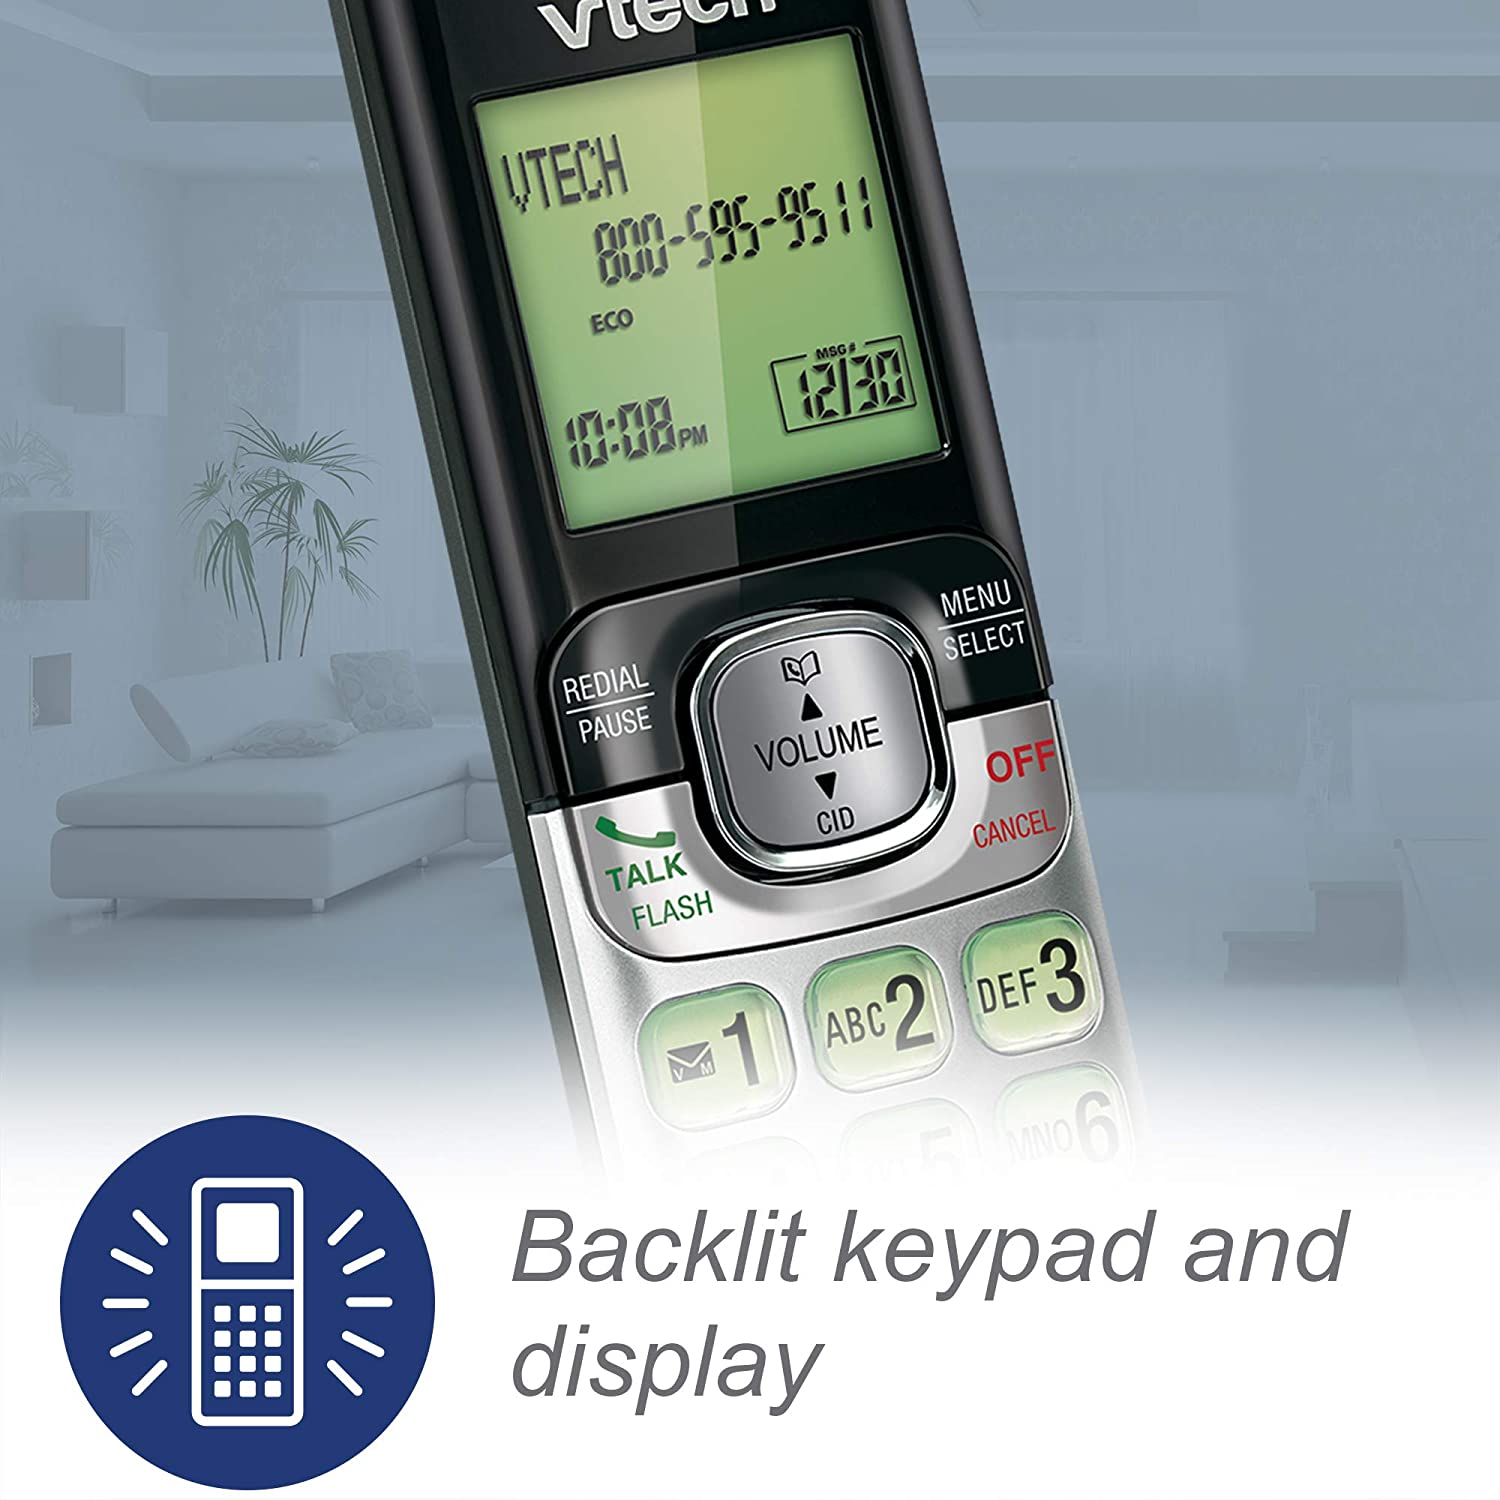 VTech CS6529 DECT 6.0 Phone Answering System, Silver and Black - with Caller ID/Call Waiting, 1 Cordless Handset